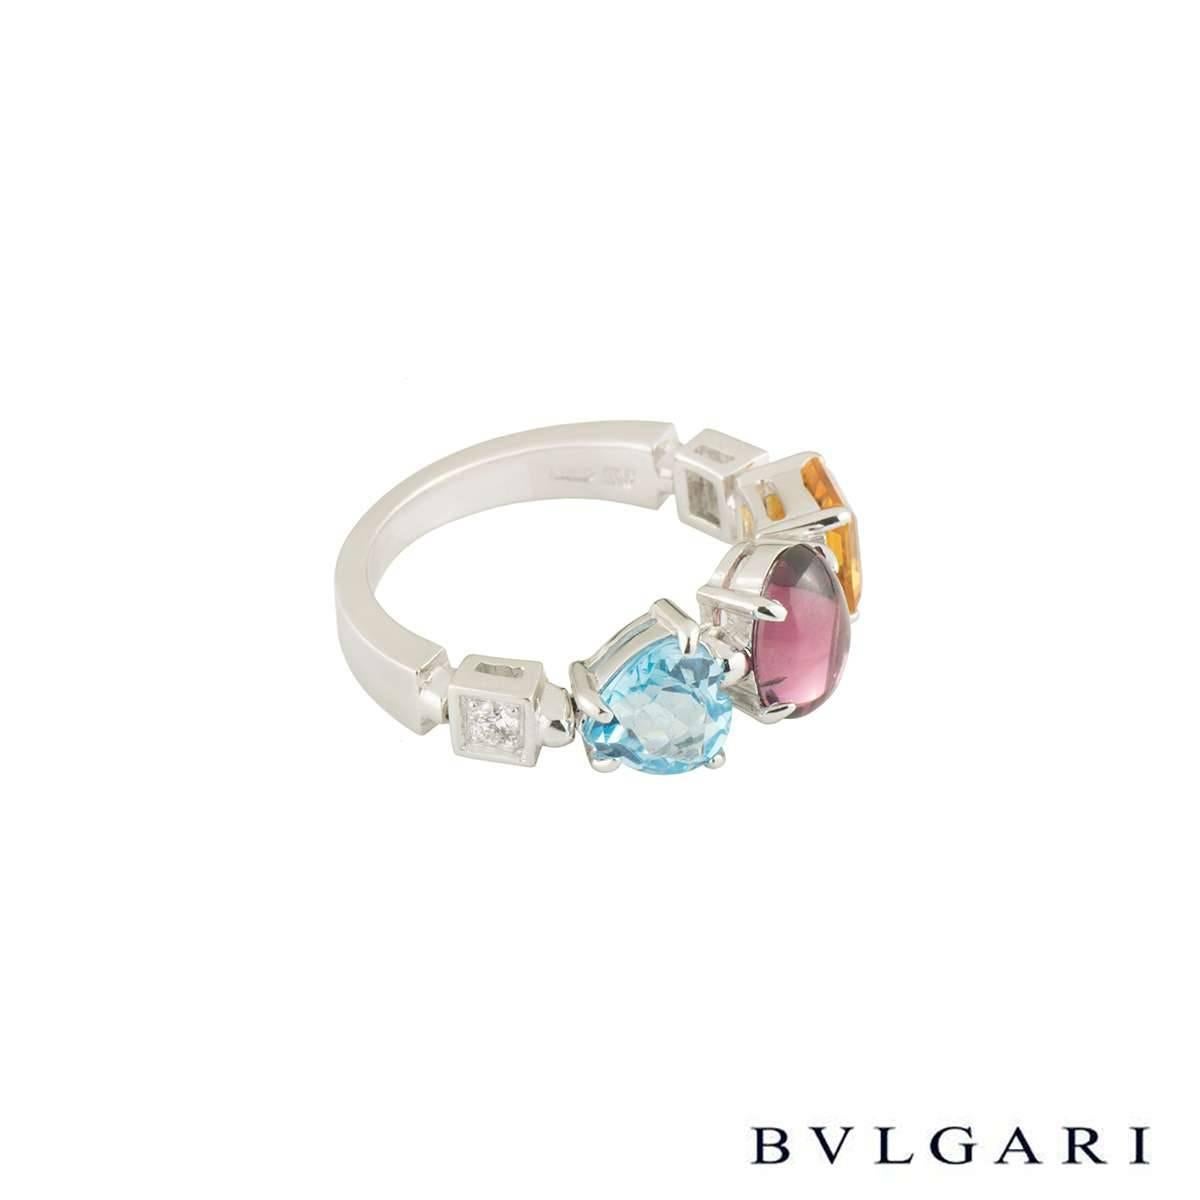 A beautiful 18k white gold ring from the Allegra collection by Bvlgari. The ring is composed of a band set with 2 round brilliant cut diamonds, a princess cut citrine quartz, a cabochon cut pink tourmaline and a heart cut blue topaz. The diamonds